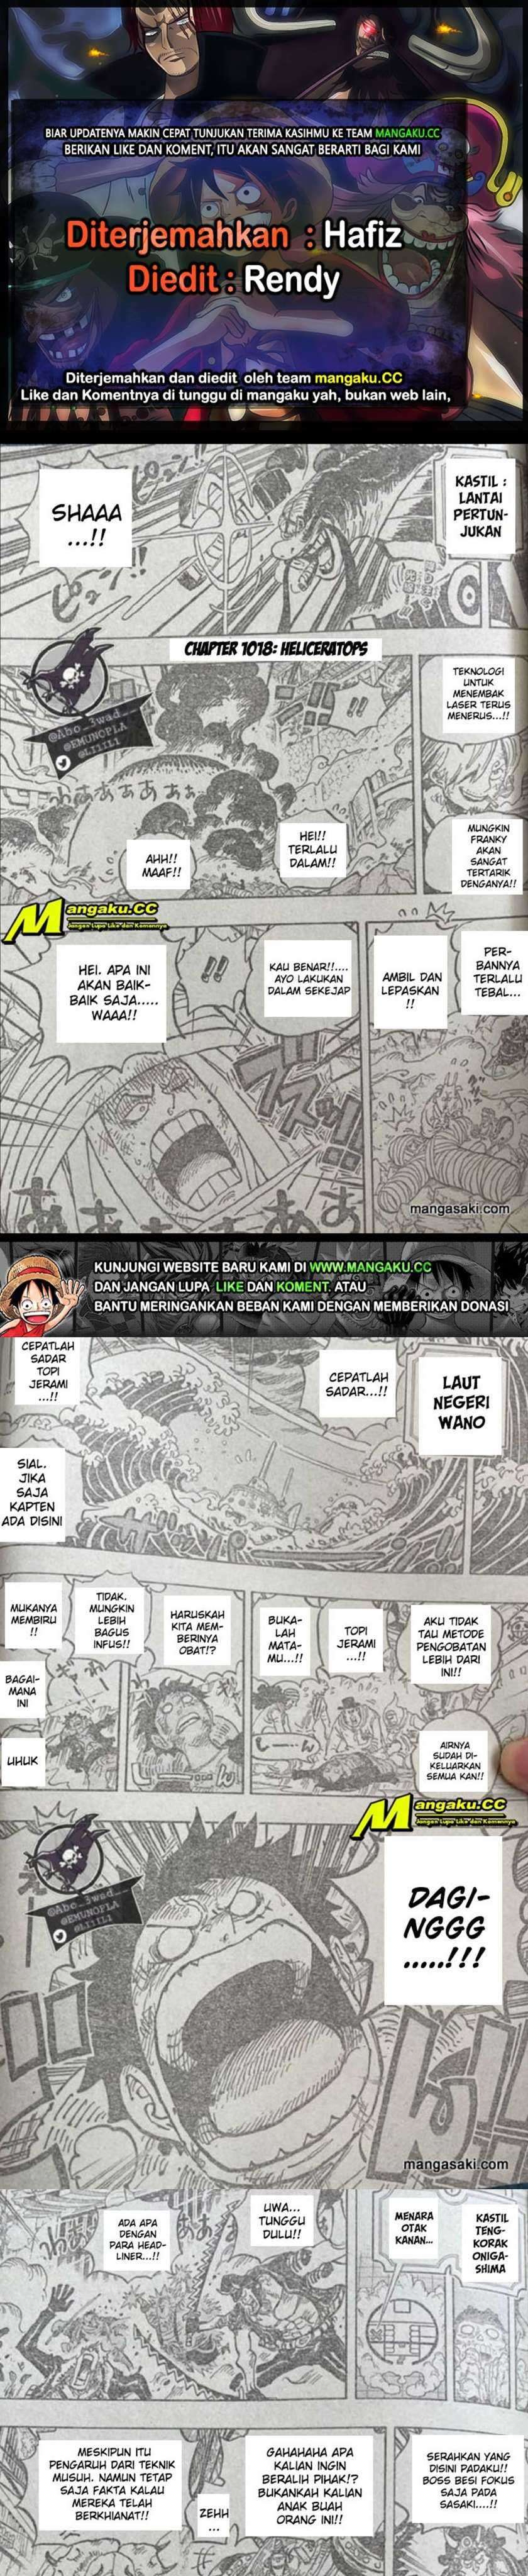 One Piece Chapter 1019 Lq - 31